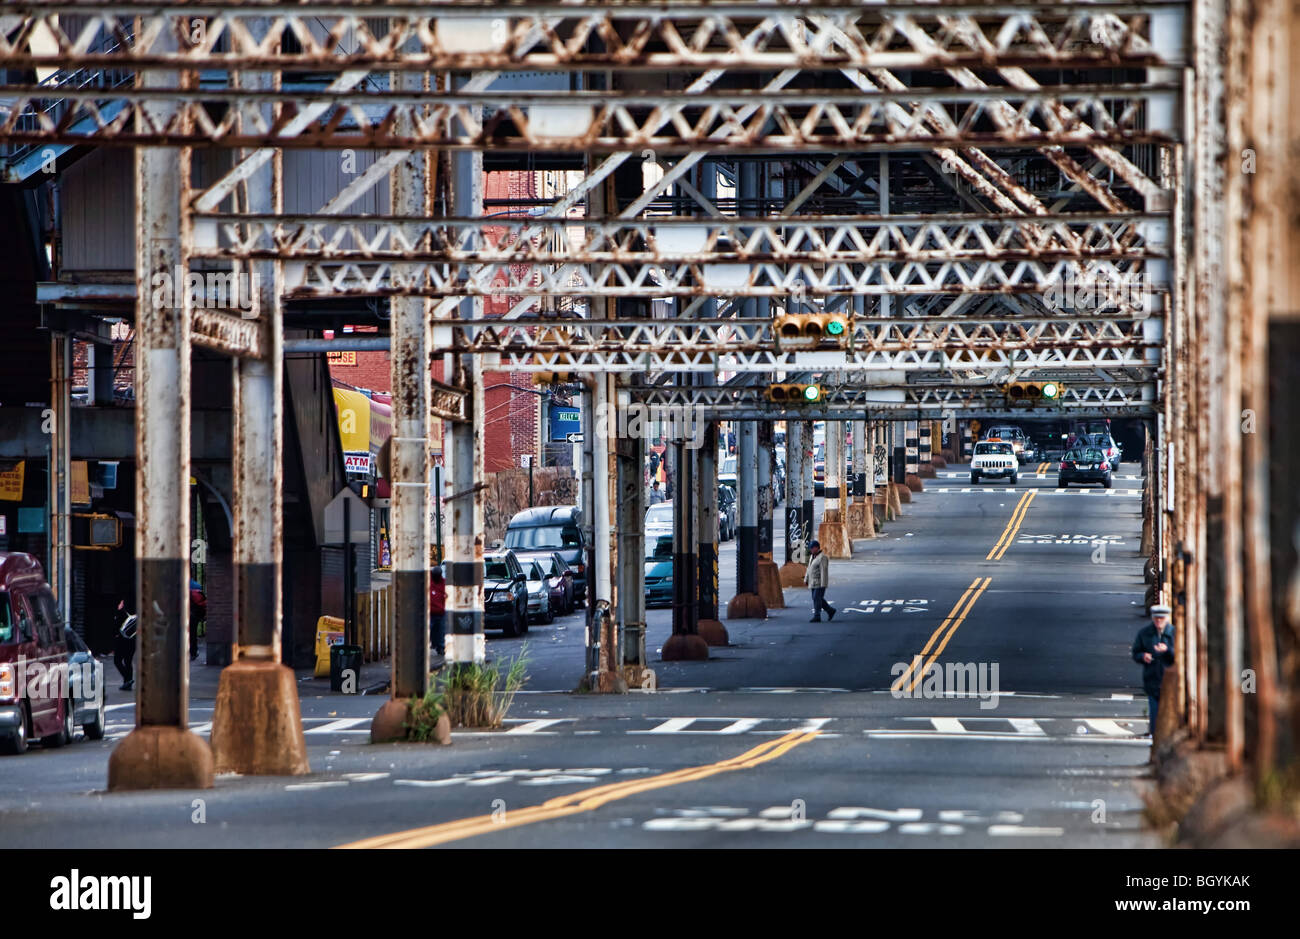 The Bronx High Resolution Stock Photography and Images - Alamy